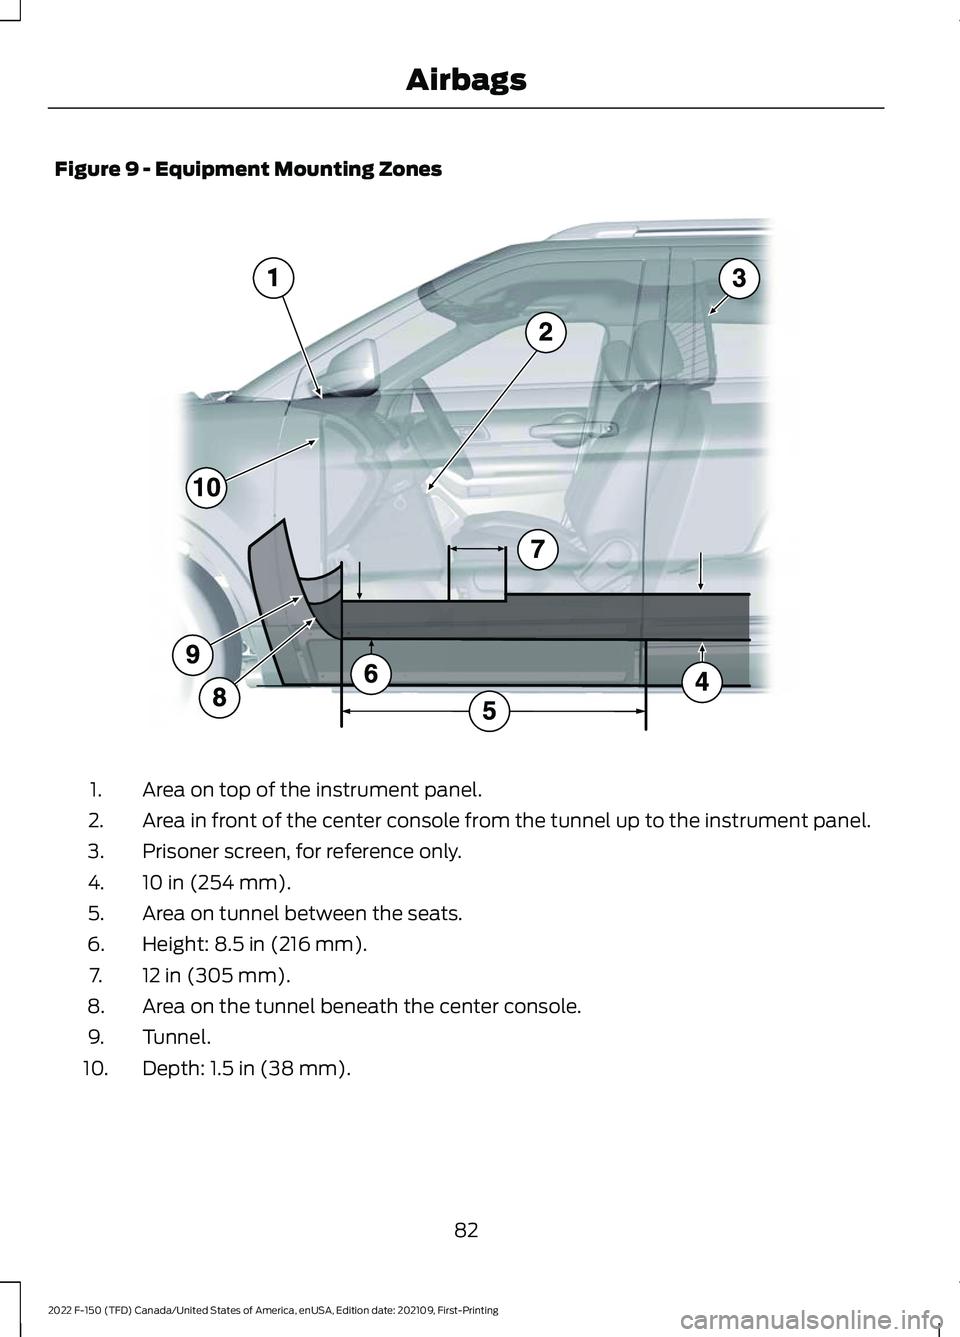 FORD F-150 2022 Manual Online Figure 9 - Equipment Mounting Zones
Area on top of the instrument panel.
1.
Area in front of the center console from the tunnel up to the instrument panel.
2.
Prisoner screen, for reference only.
3.
1